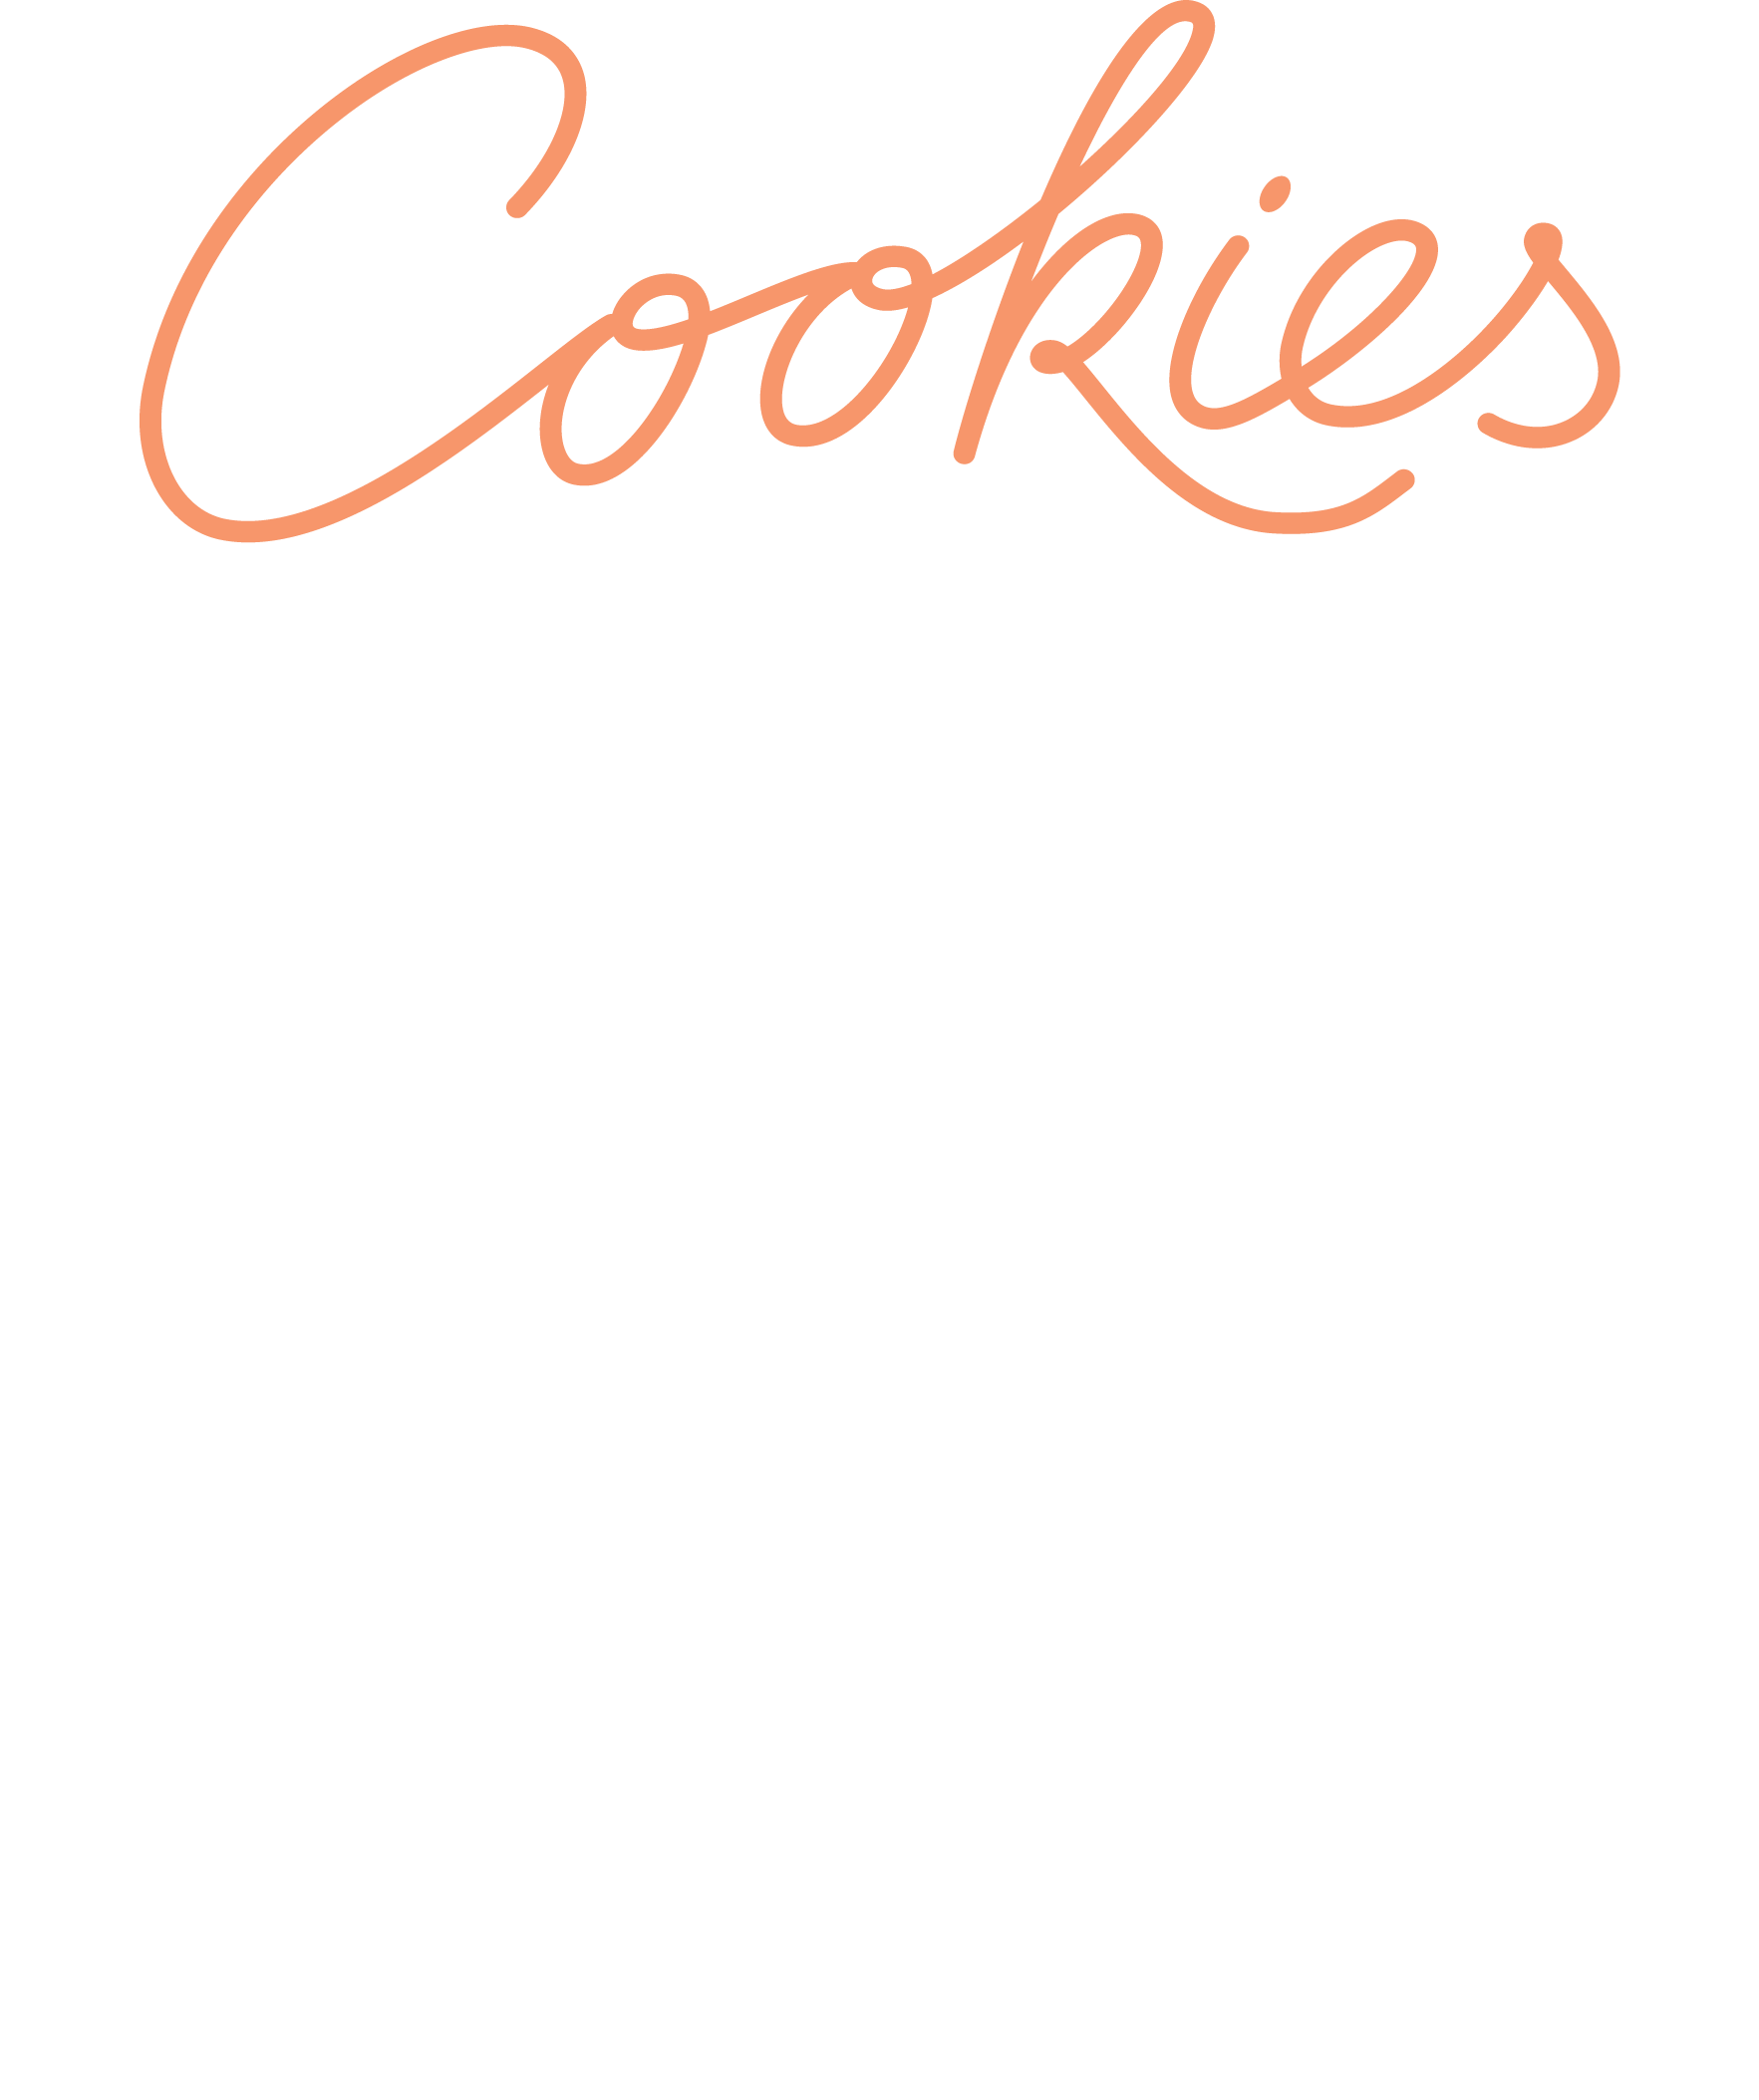 Cookies For Good